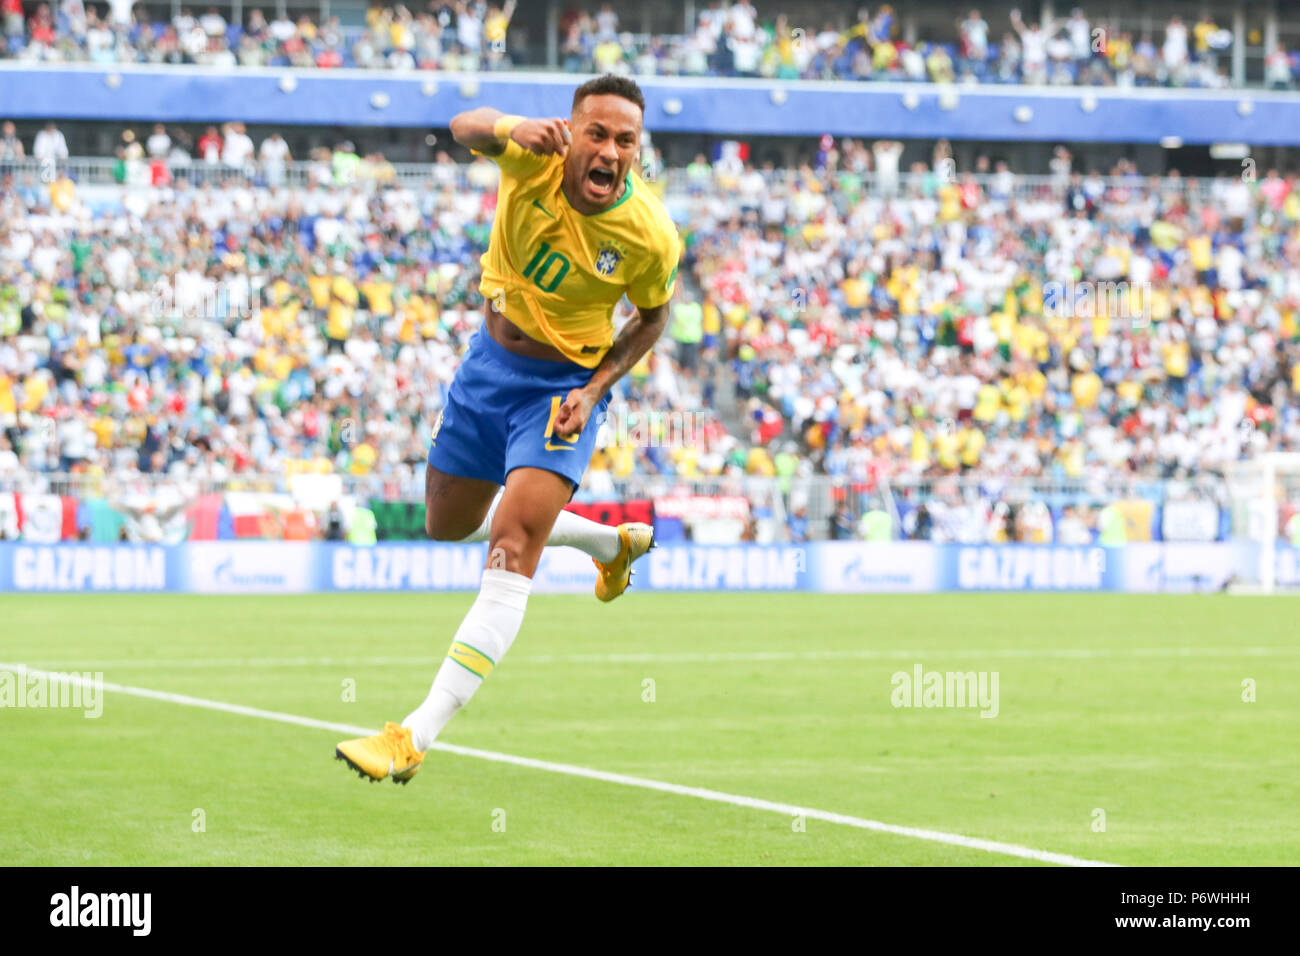 Samara, Russia. 2nd July, 2018. Neymar of Brazil during match against Mexico game valid for the eighth round of finals of the 2014 FIFA World Cup Russia at the Samara Arena in the city of Samara in Russia this Monday, 02.  Photo William Volcov Credit: Brazil Photo Press/Alamy Live News Stock Photo